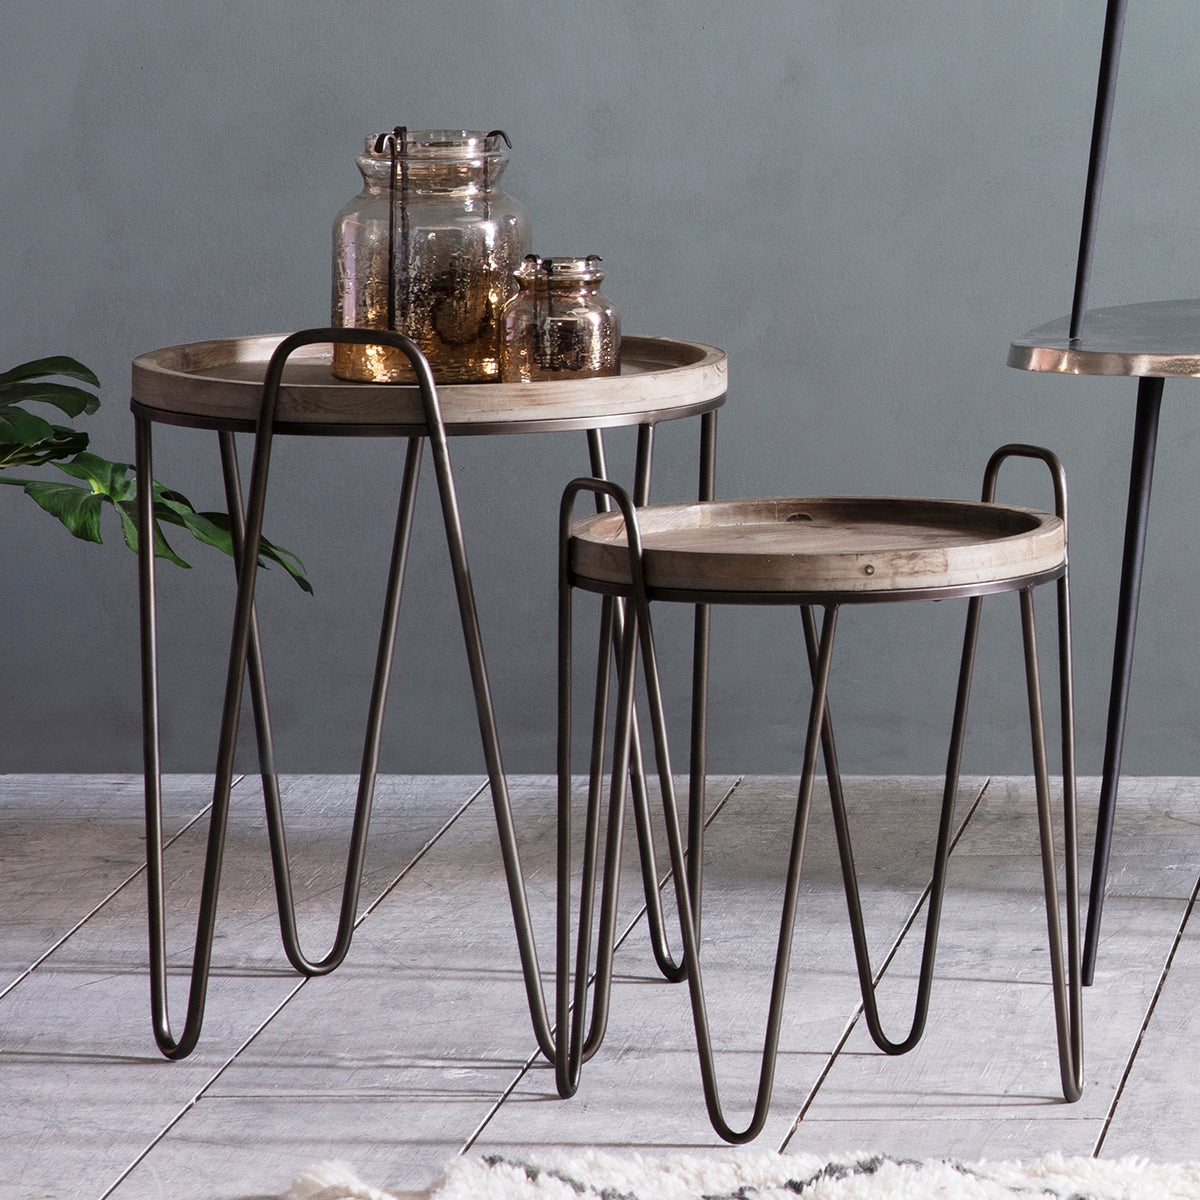 Nuffield Nest of 2 Tables with metal legs and vases for home furniture and interior decor.